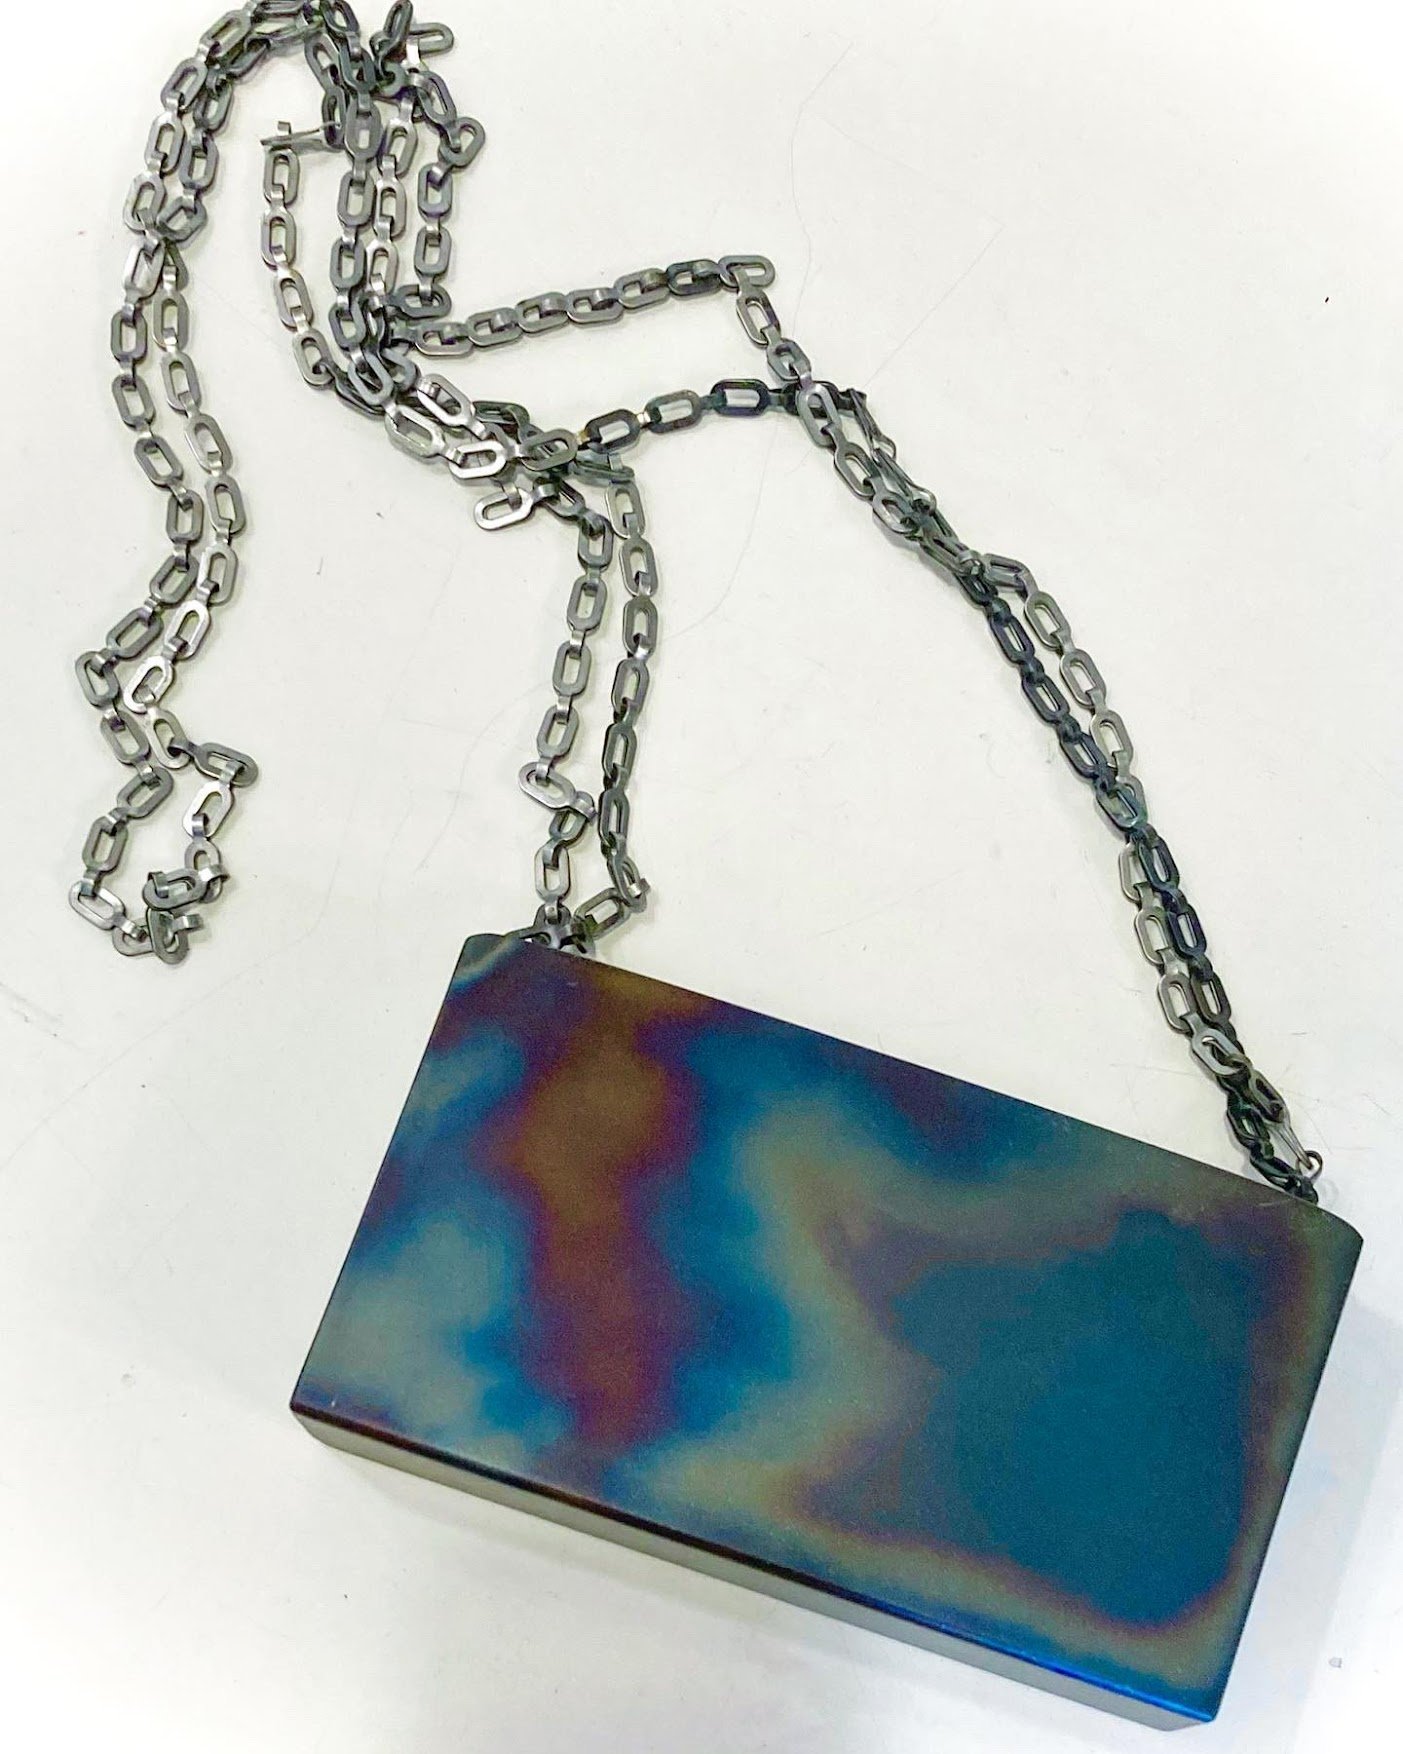  Heat treated steel welded purse with stainless steel chain strap (back, 2/2) 